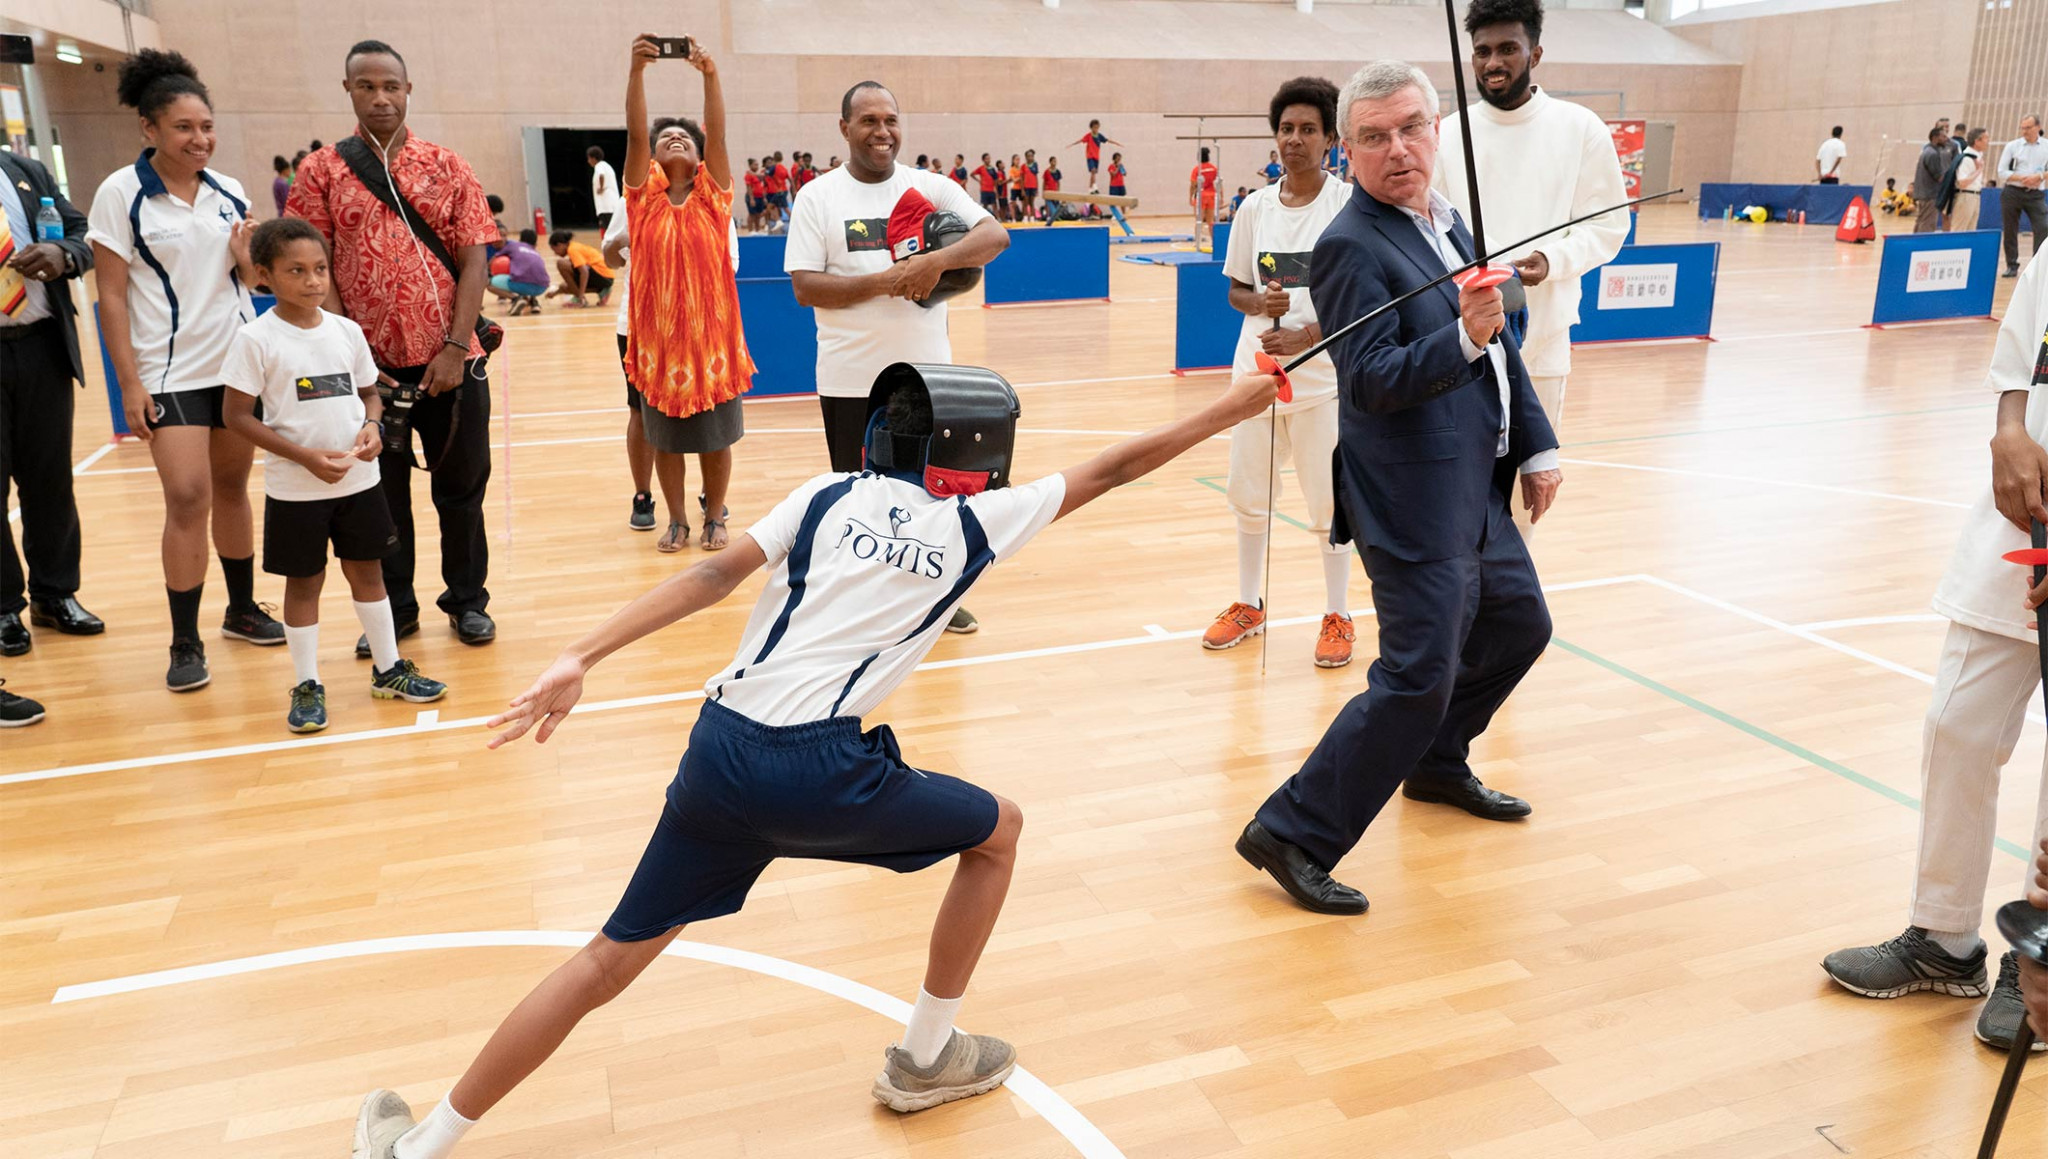 Thomas Bach showed off his fencing skills in Papua New Guinea last month ©IOC